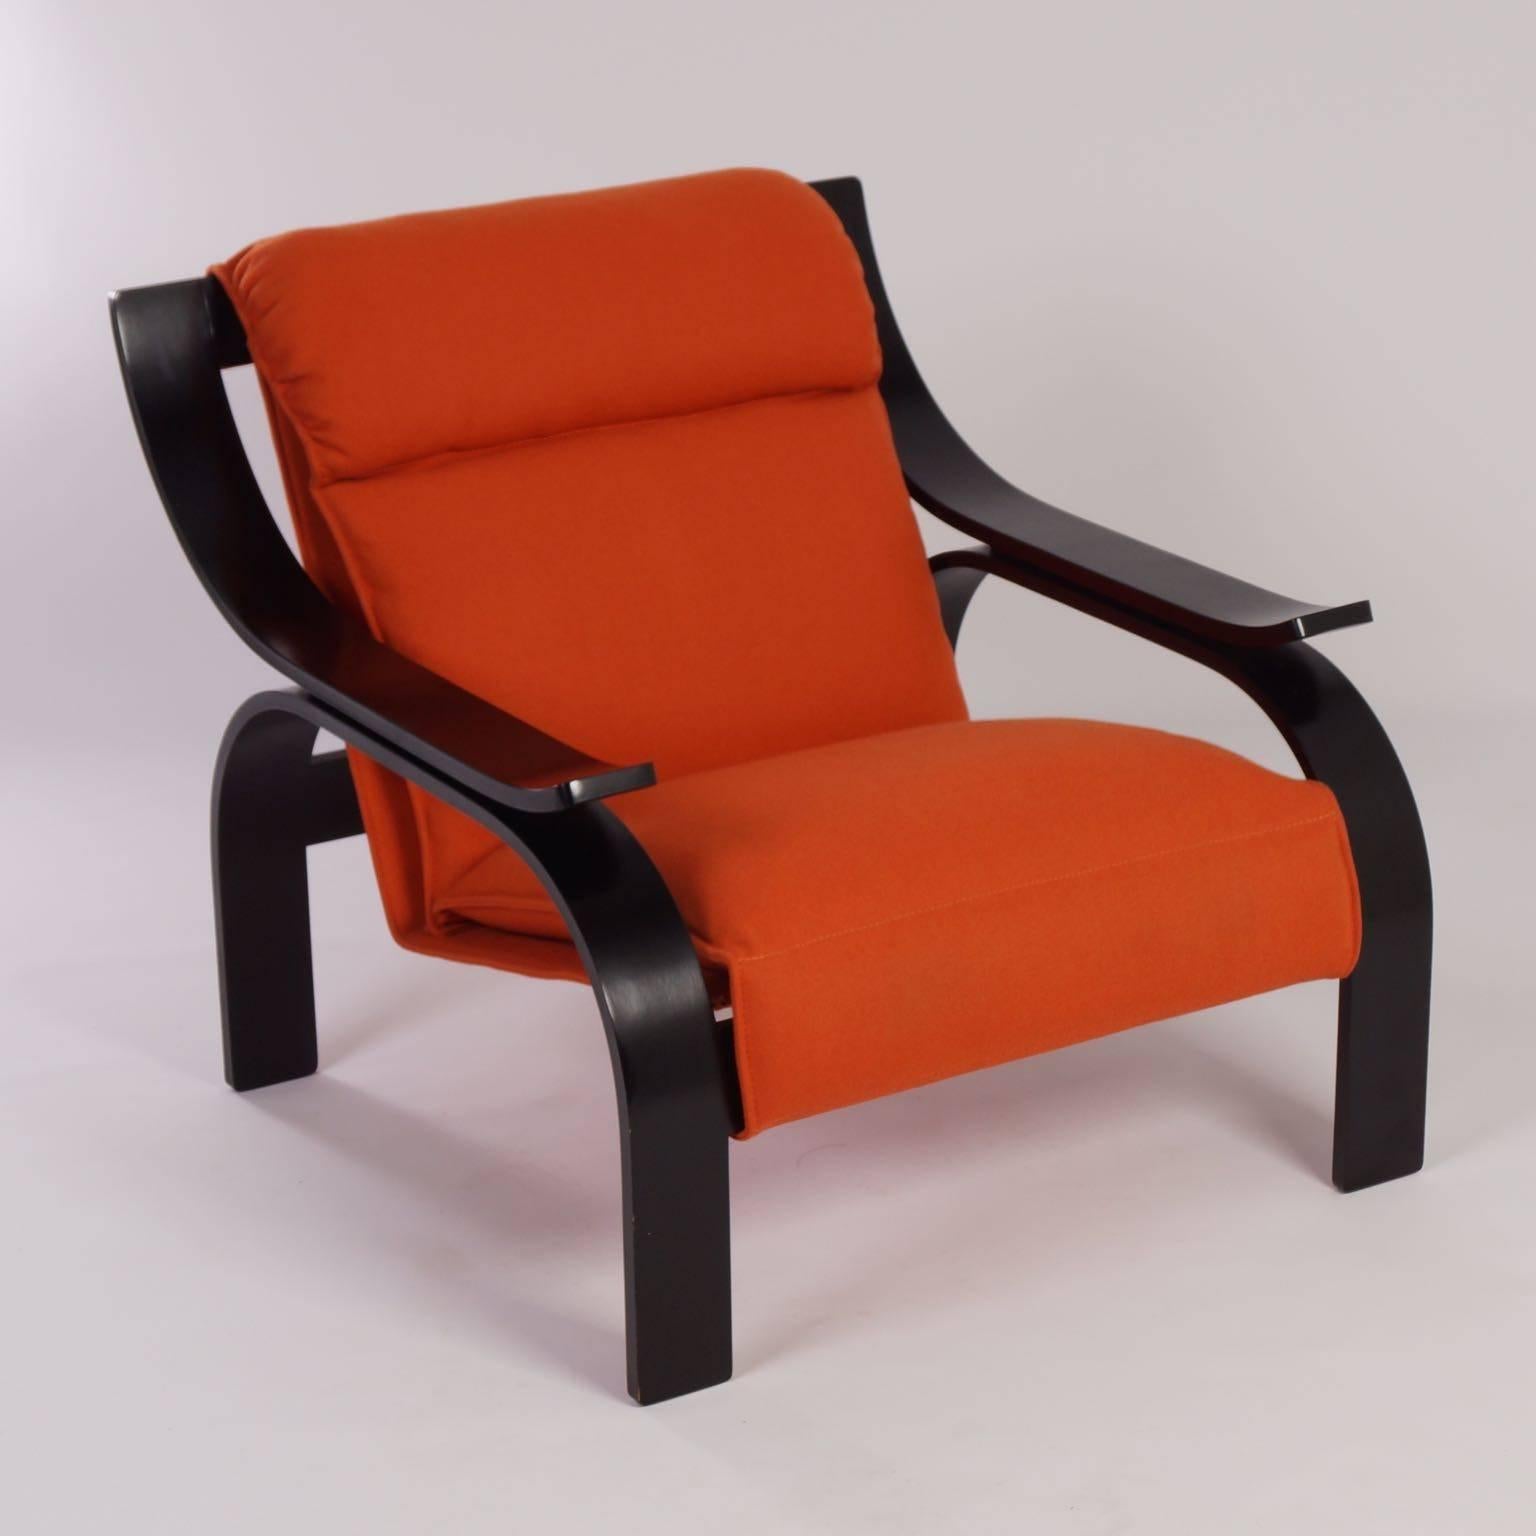 Woodline armchair by Marco Zanuso for Arflex, 1960s. Very nice armchair from the Woodline series designed by Marco Zanuso and manufactured by Arflex, Italy in 1964. A comfortable armchair, with an elegant shape.

The dimensions are: H x W x D = 73